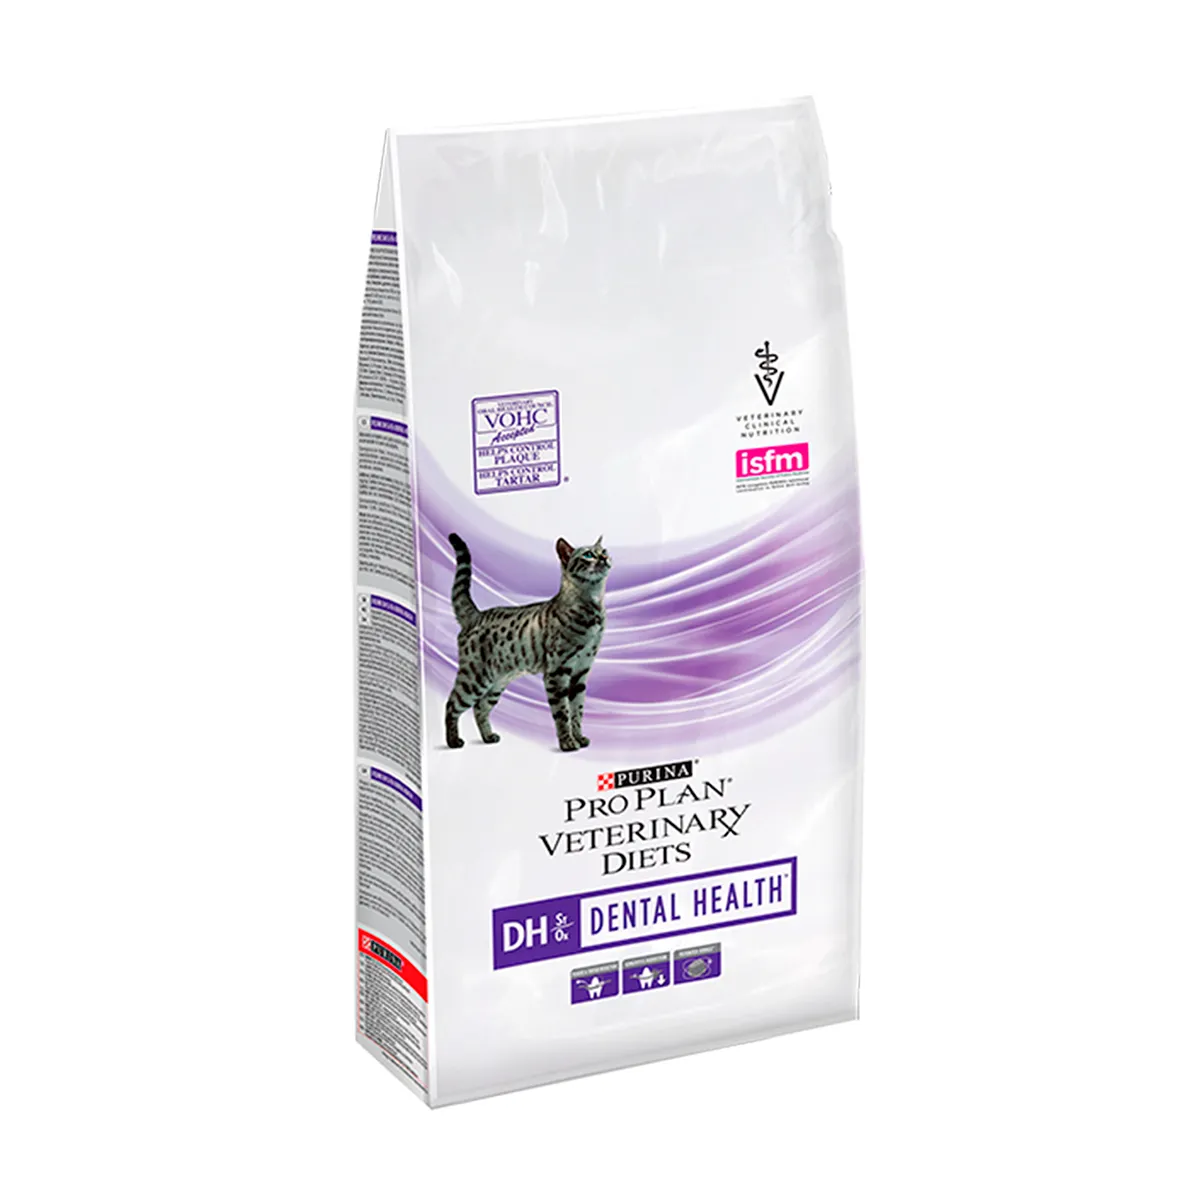 ProPlan-Veterinary-Diets-DH-Dental-Health-Gato-Lateral